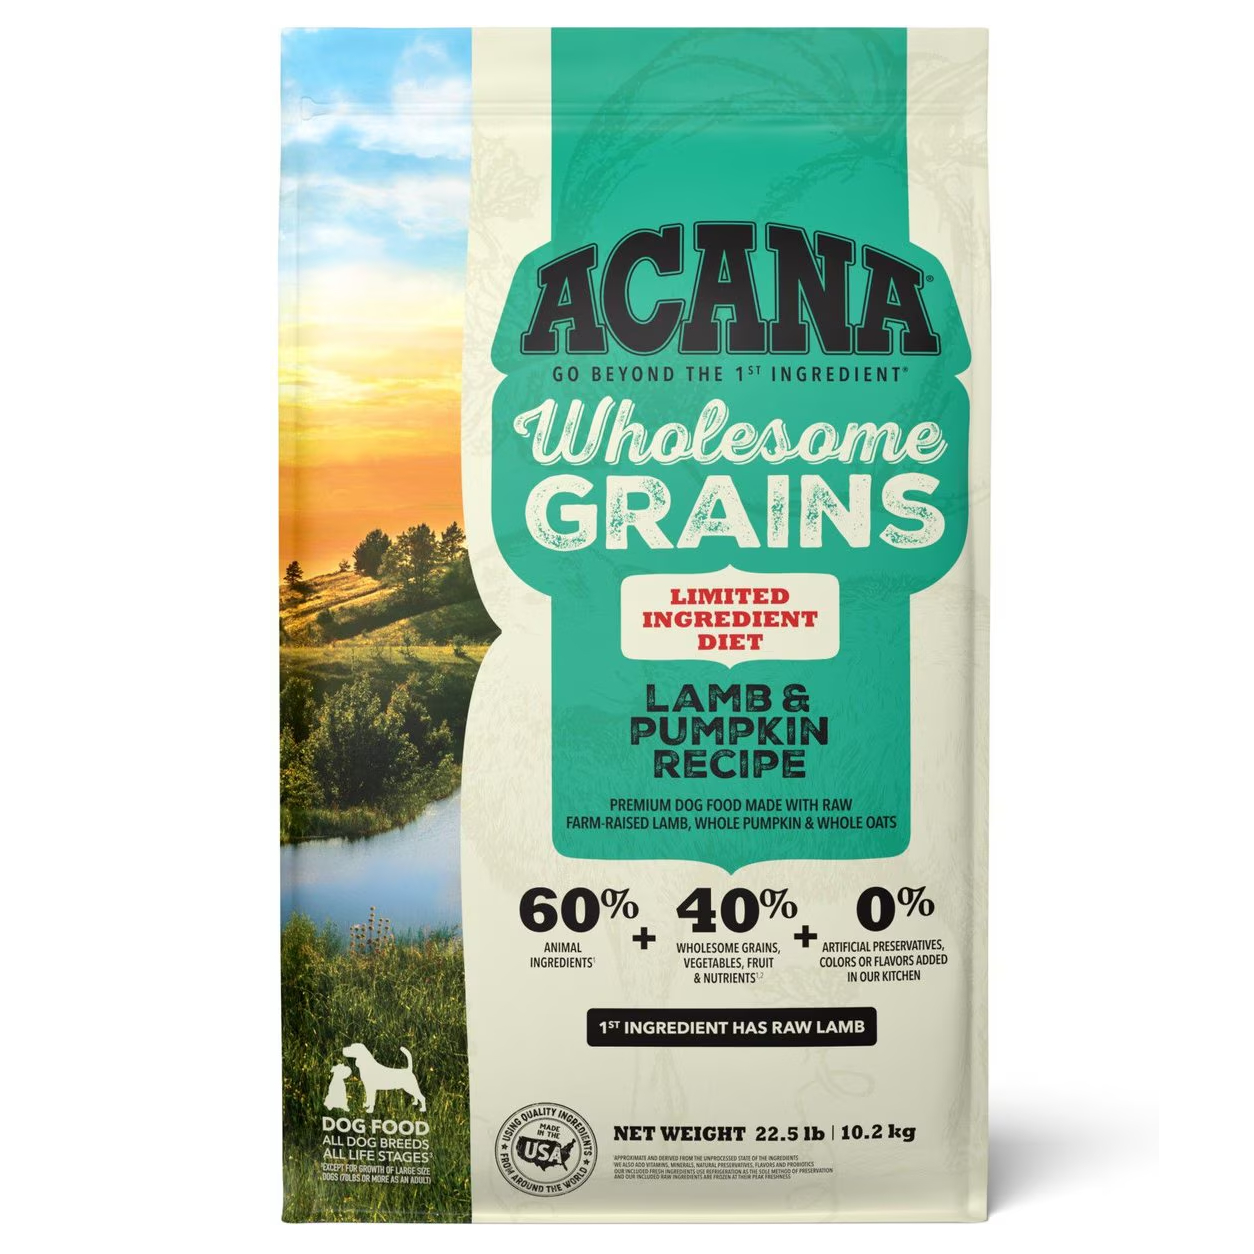 ACANA Singles + Wholesome Grains Dry Dog Food